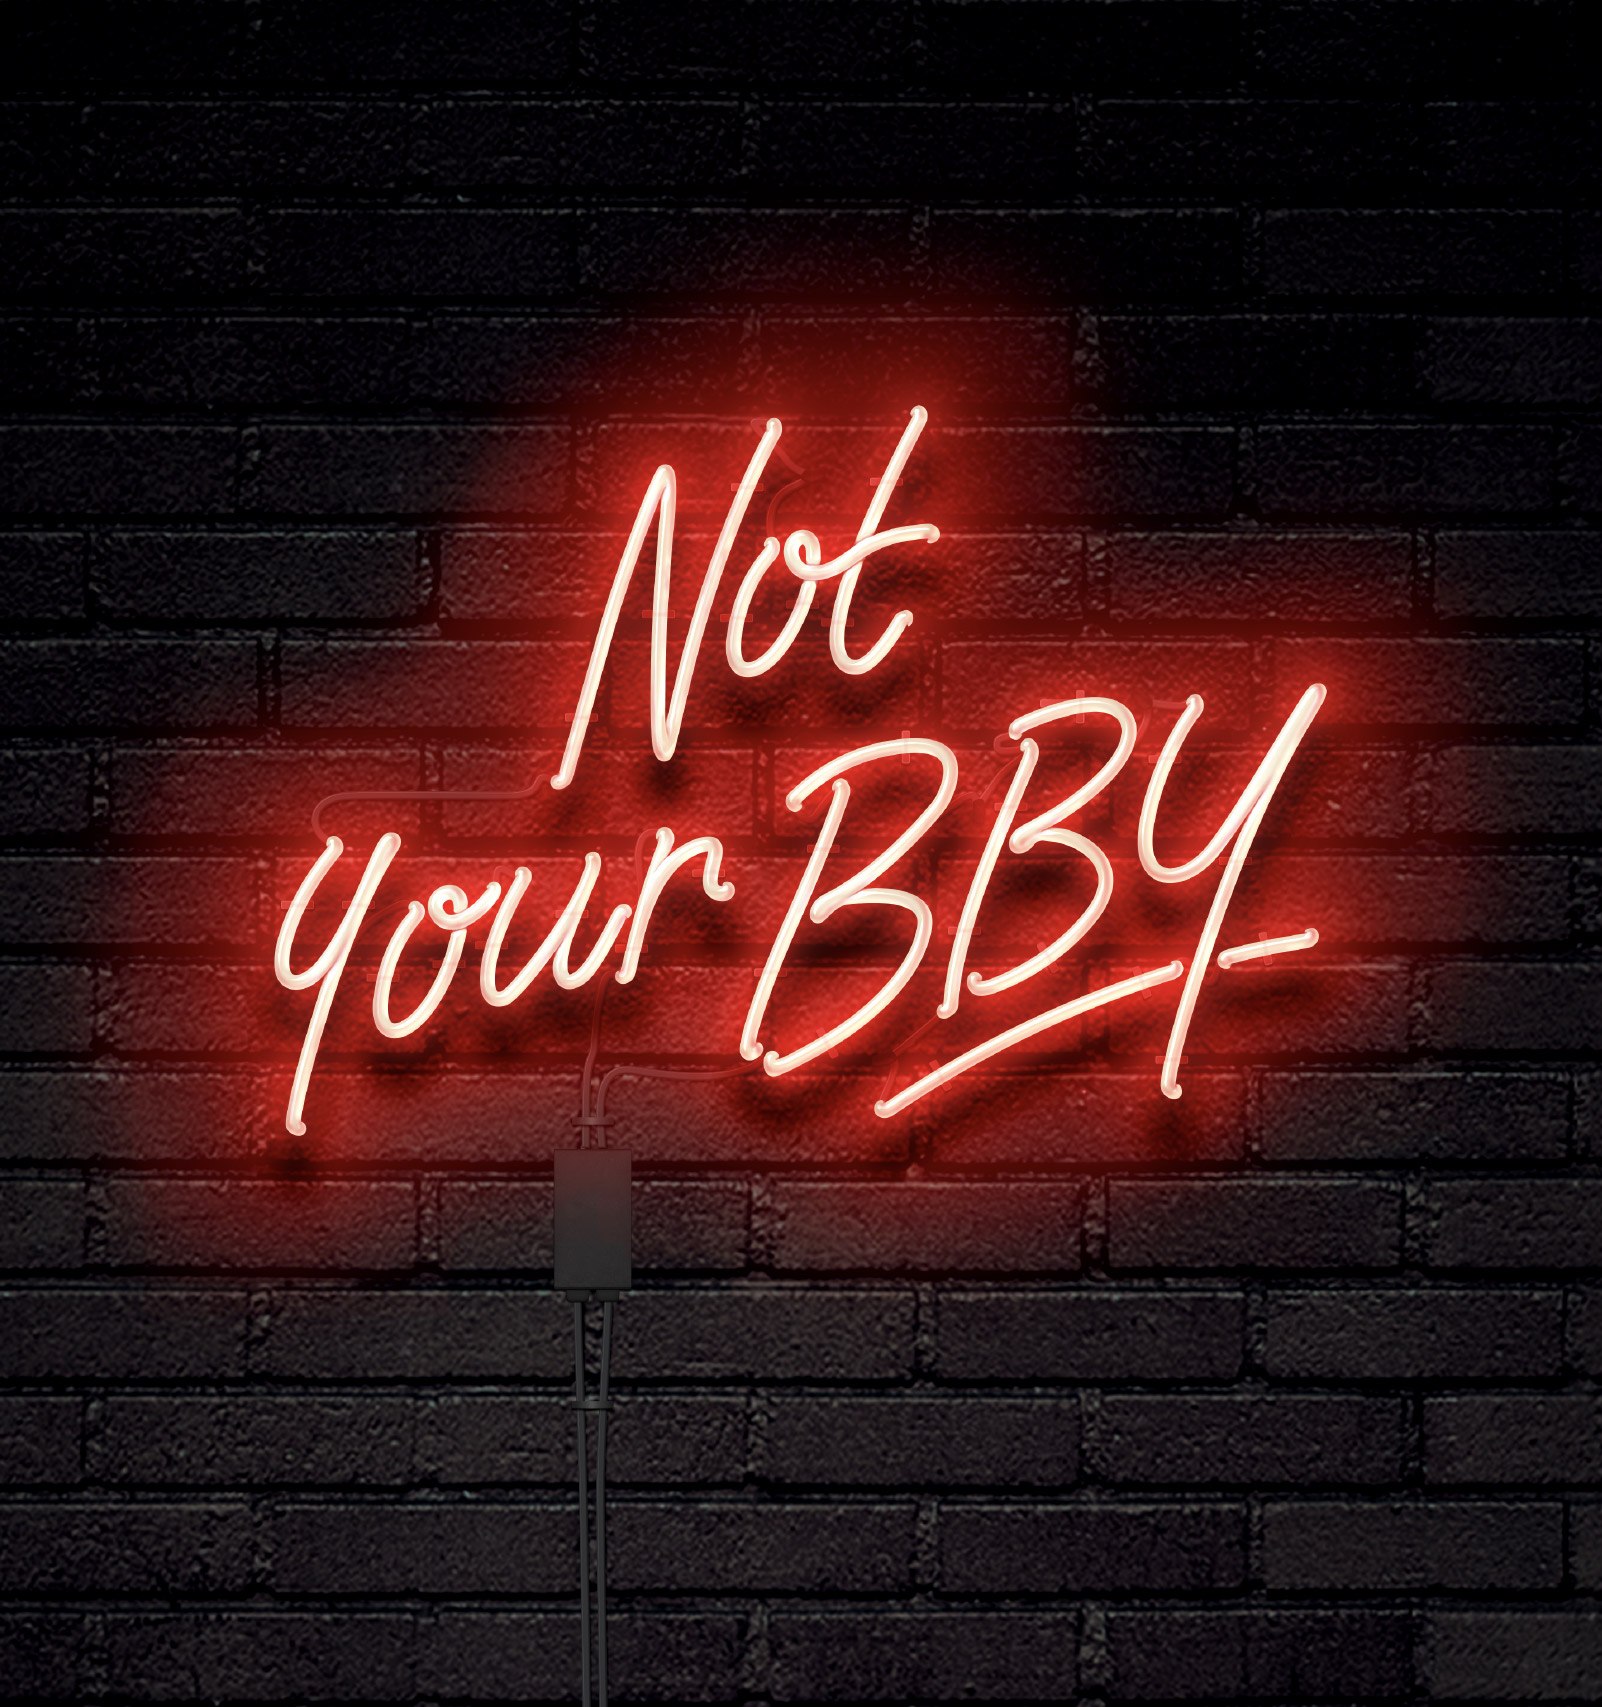 Not-Your-BBY-Neon_Branding_Gold-Coast-Graphic-Design